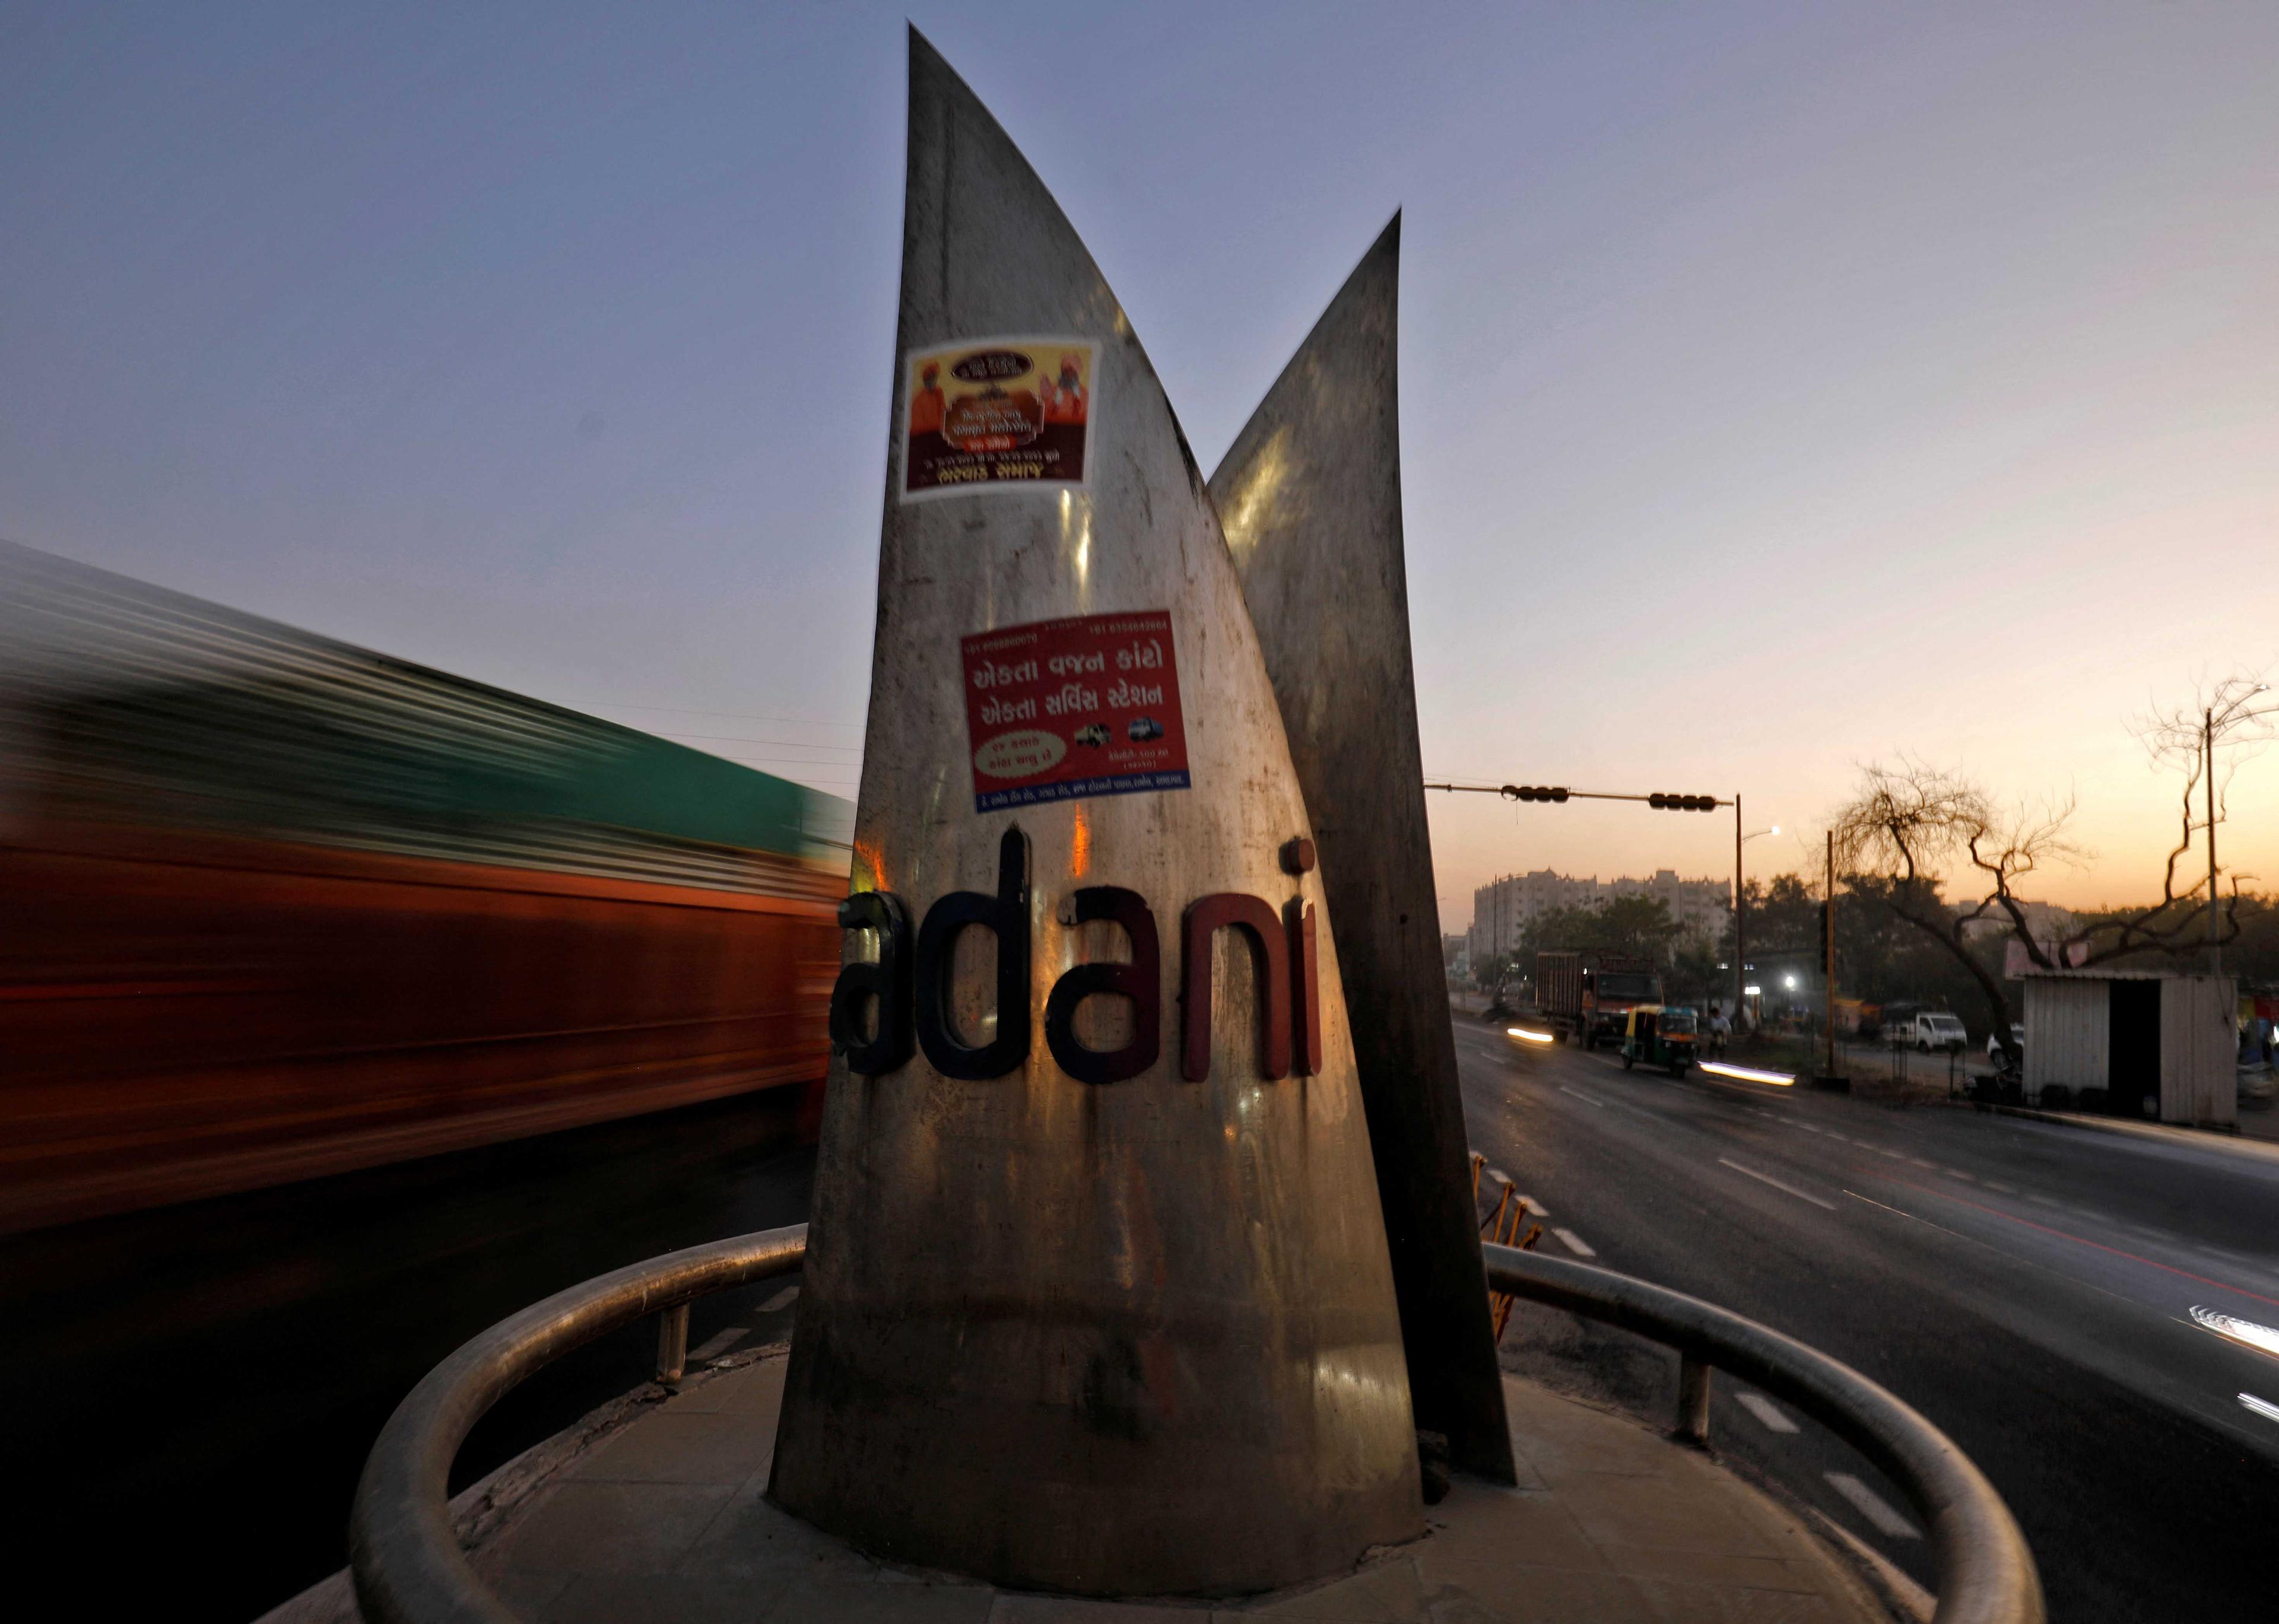 Traffic moves past the logo of the Adani Group installed at a roundabout on the ring road in Ahmedabad, India, Feb 2. Photo: Reuters